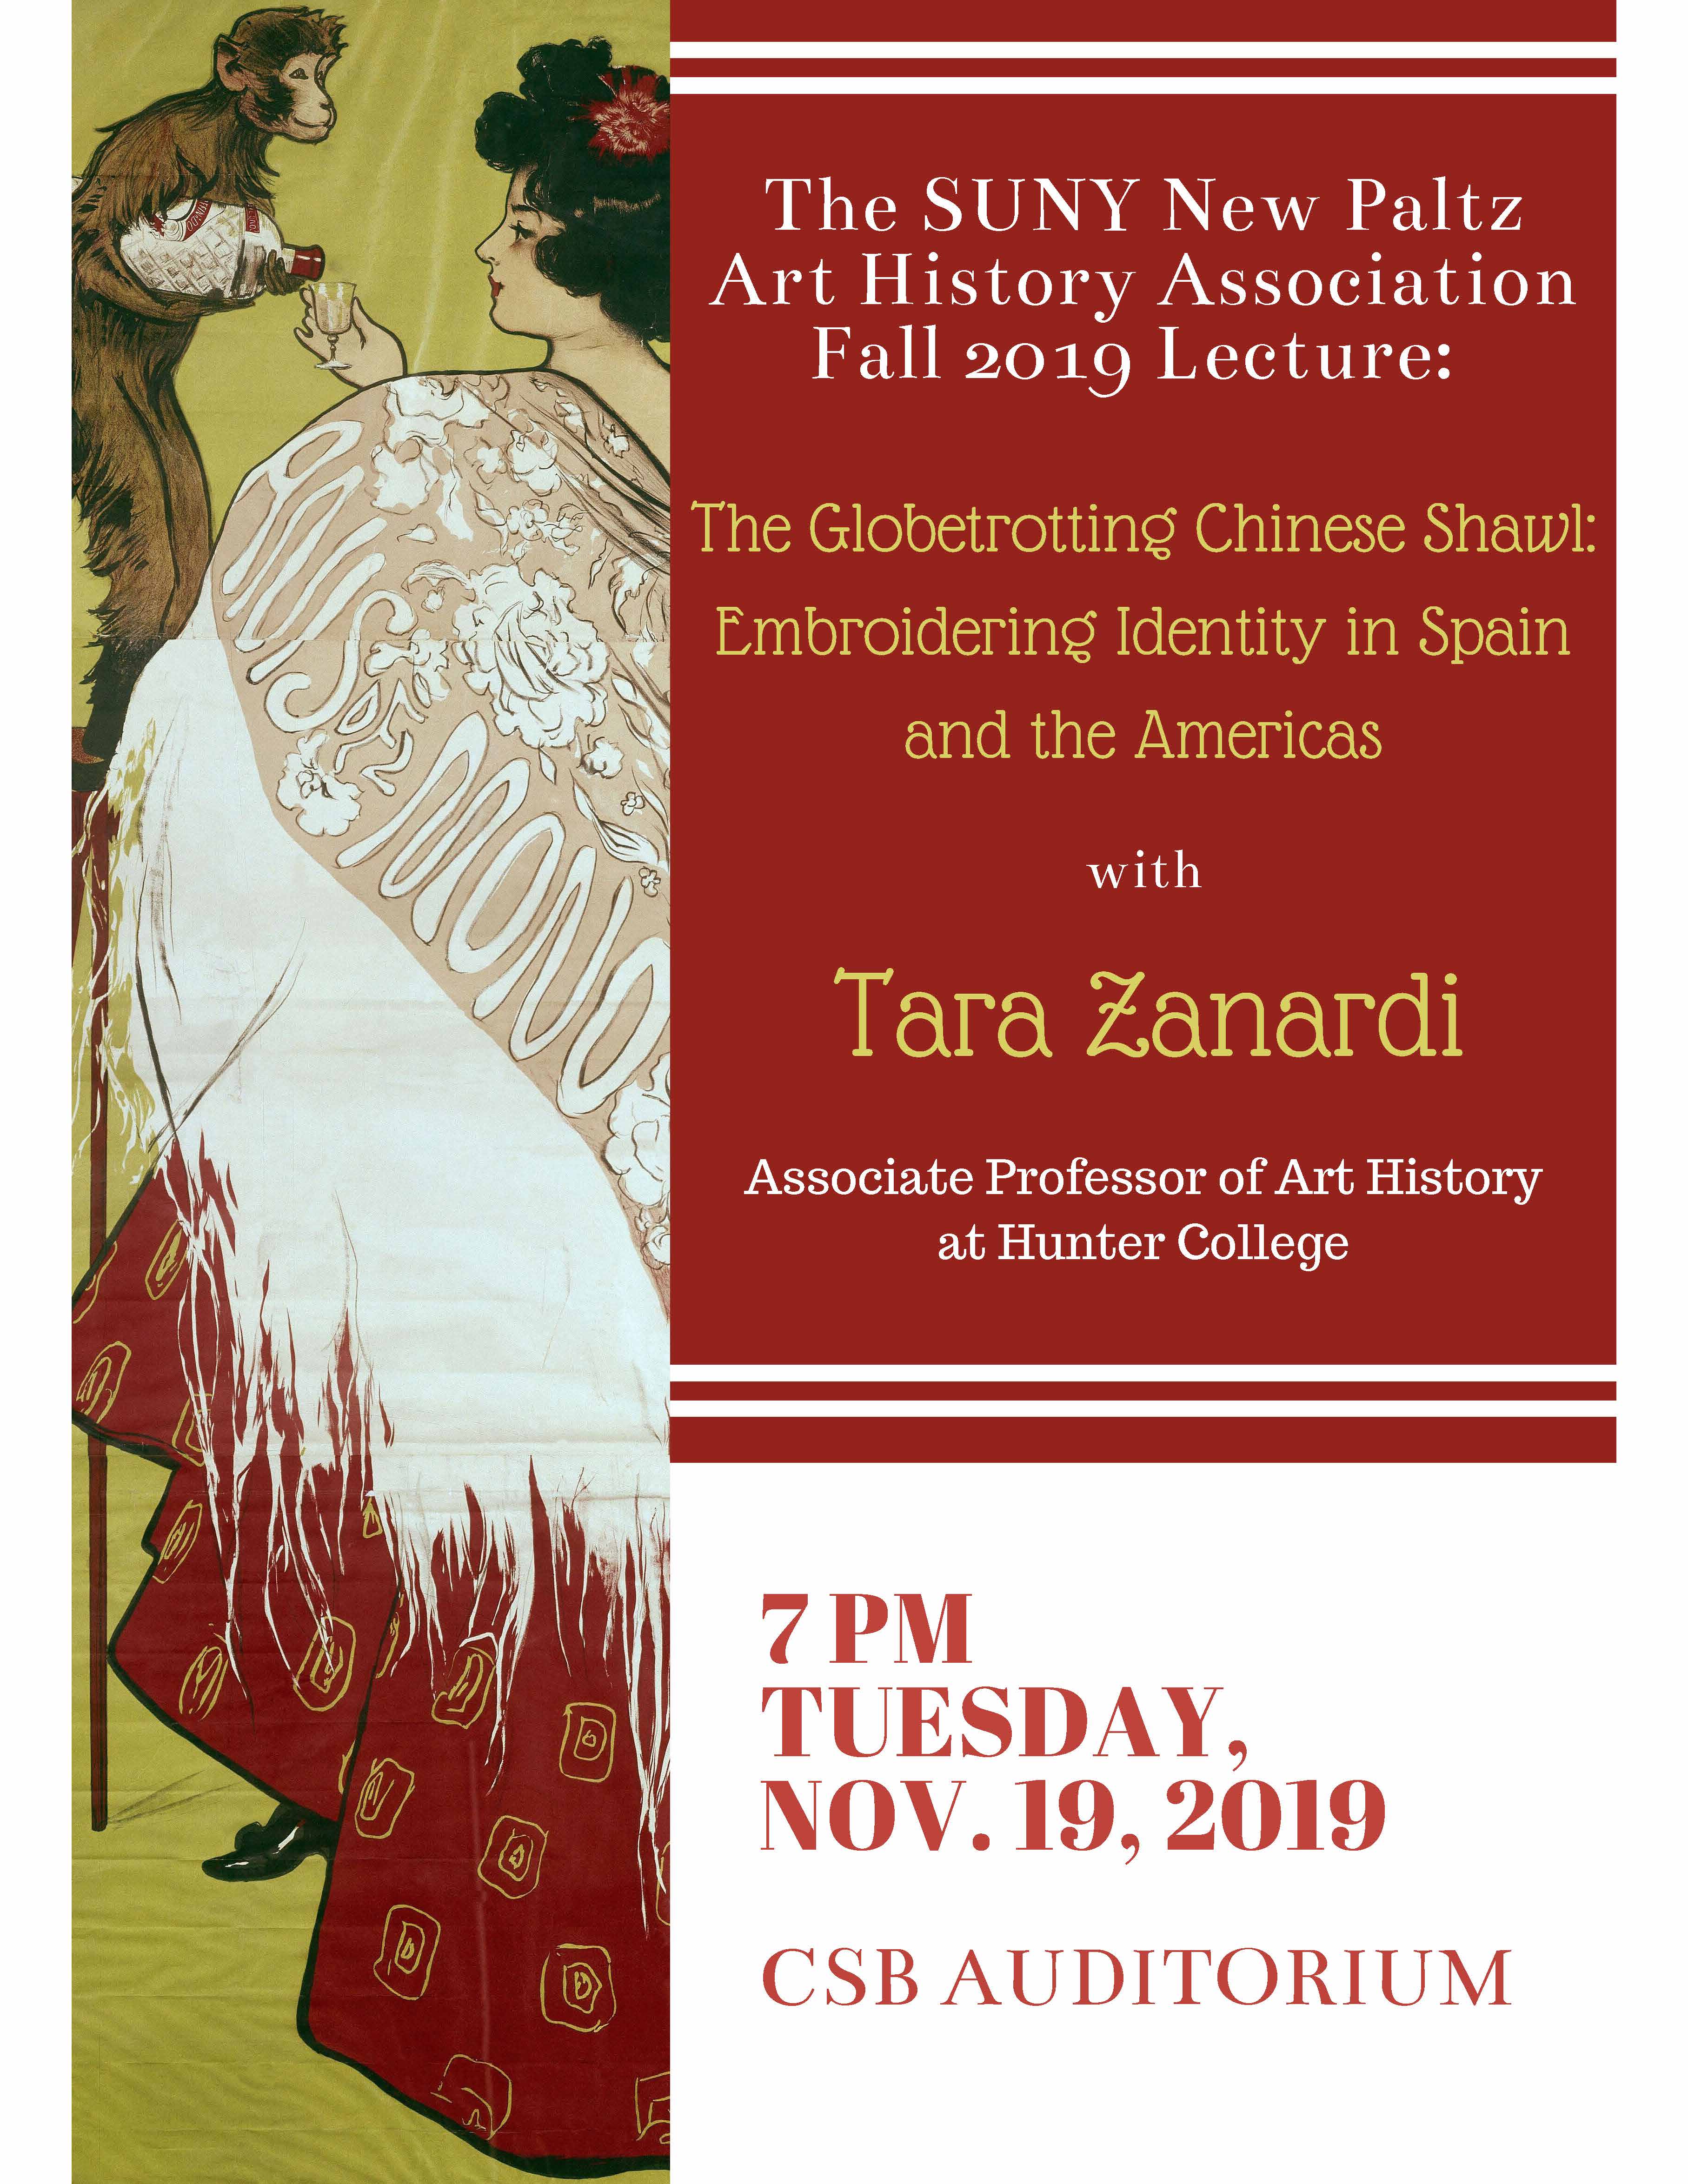 Poster image for Art History Association Speaker Tara Zanardi Chinese Export Shawls adoption in dress in Spain and the Americas